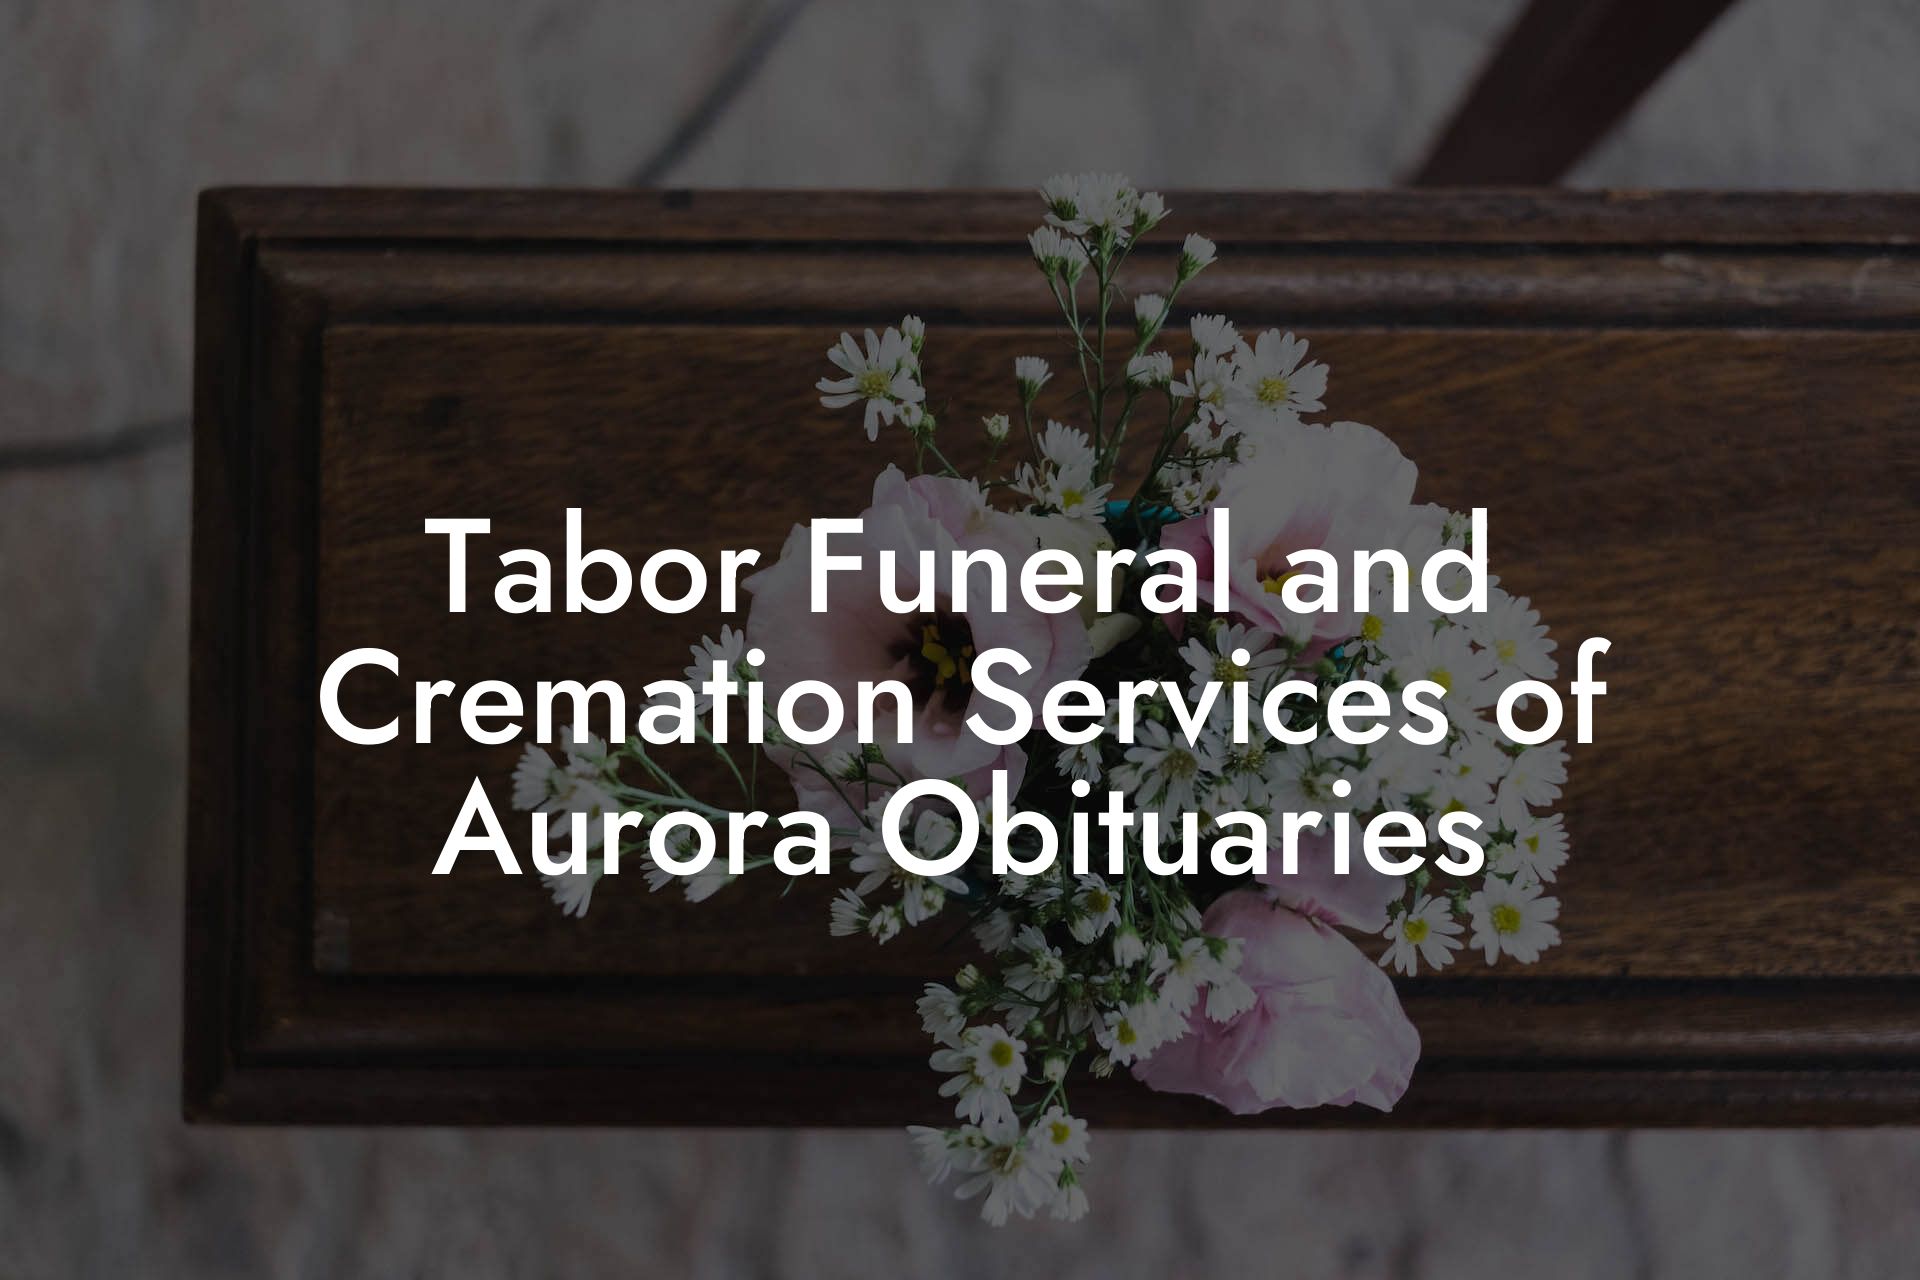 Tabor Funeral and Cremation Services of Aurora Obituaries